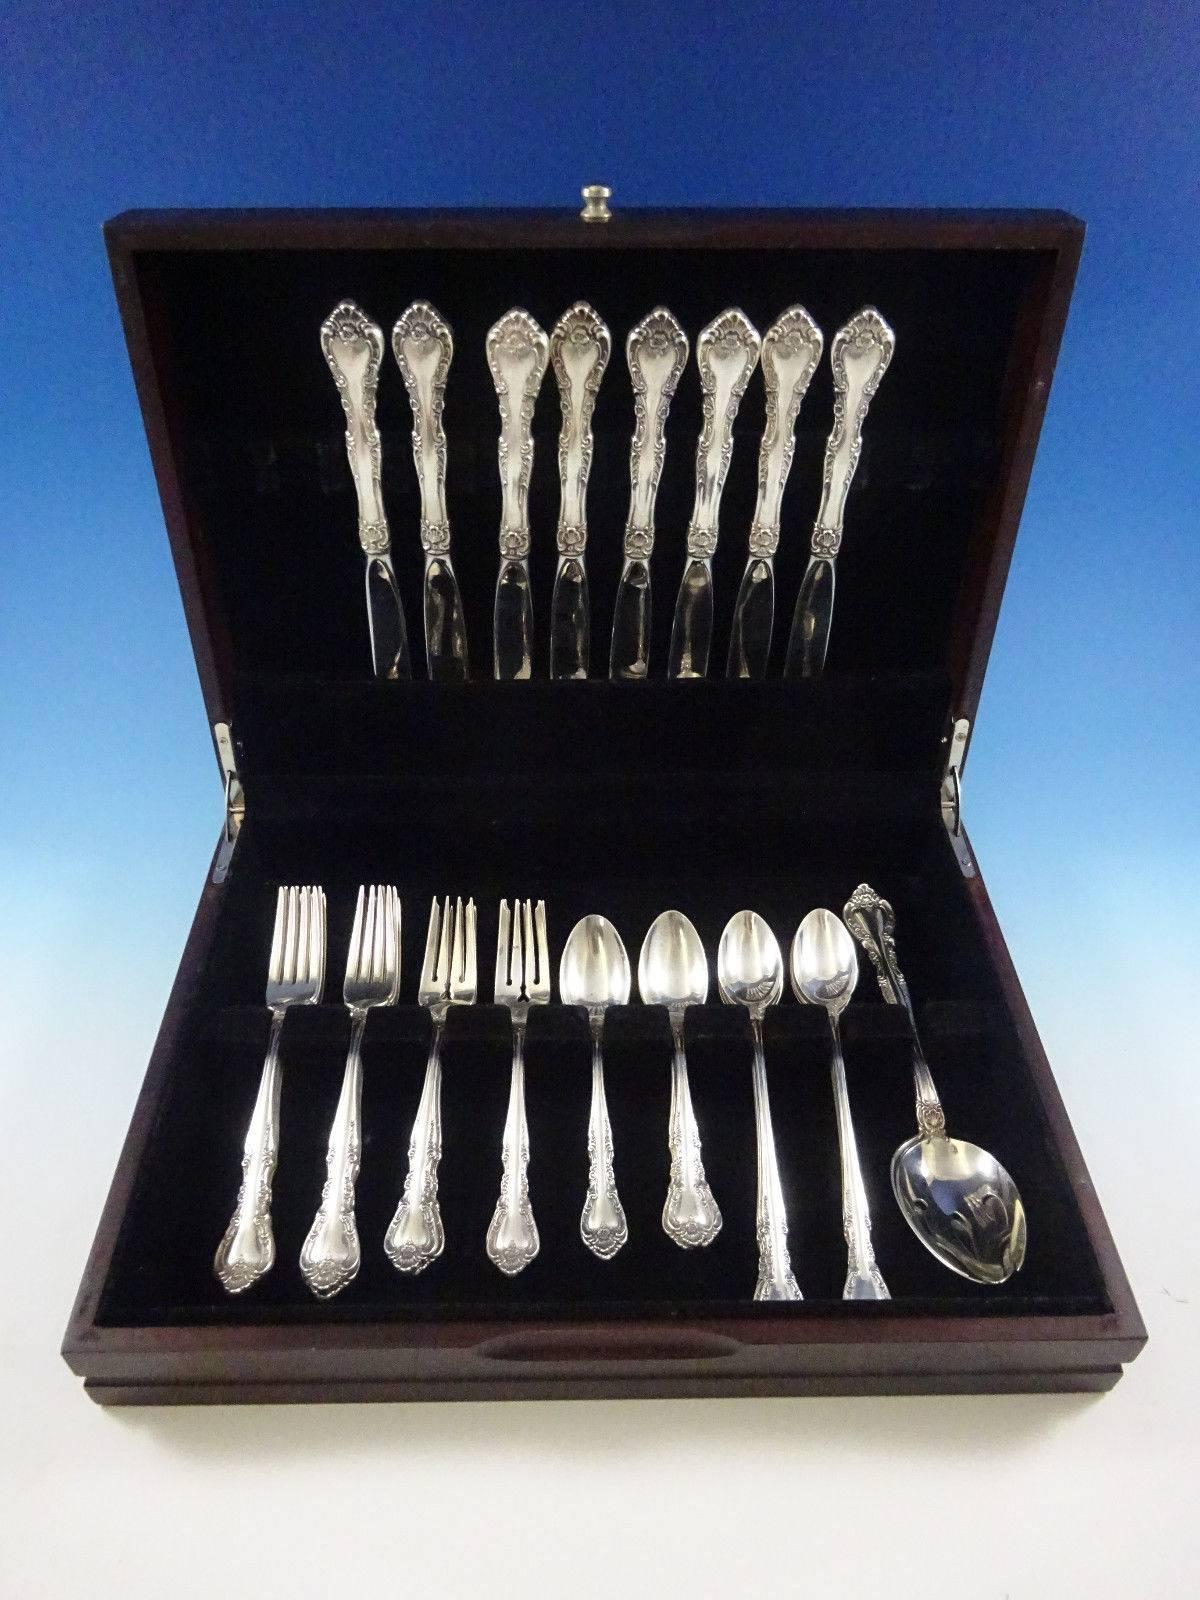 Alencon Lace by Gorham sterling silver Flatware set -  42 pieces. This set includes:

8 Knives, 9 1/4